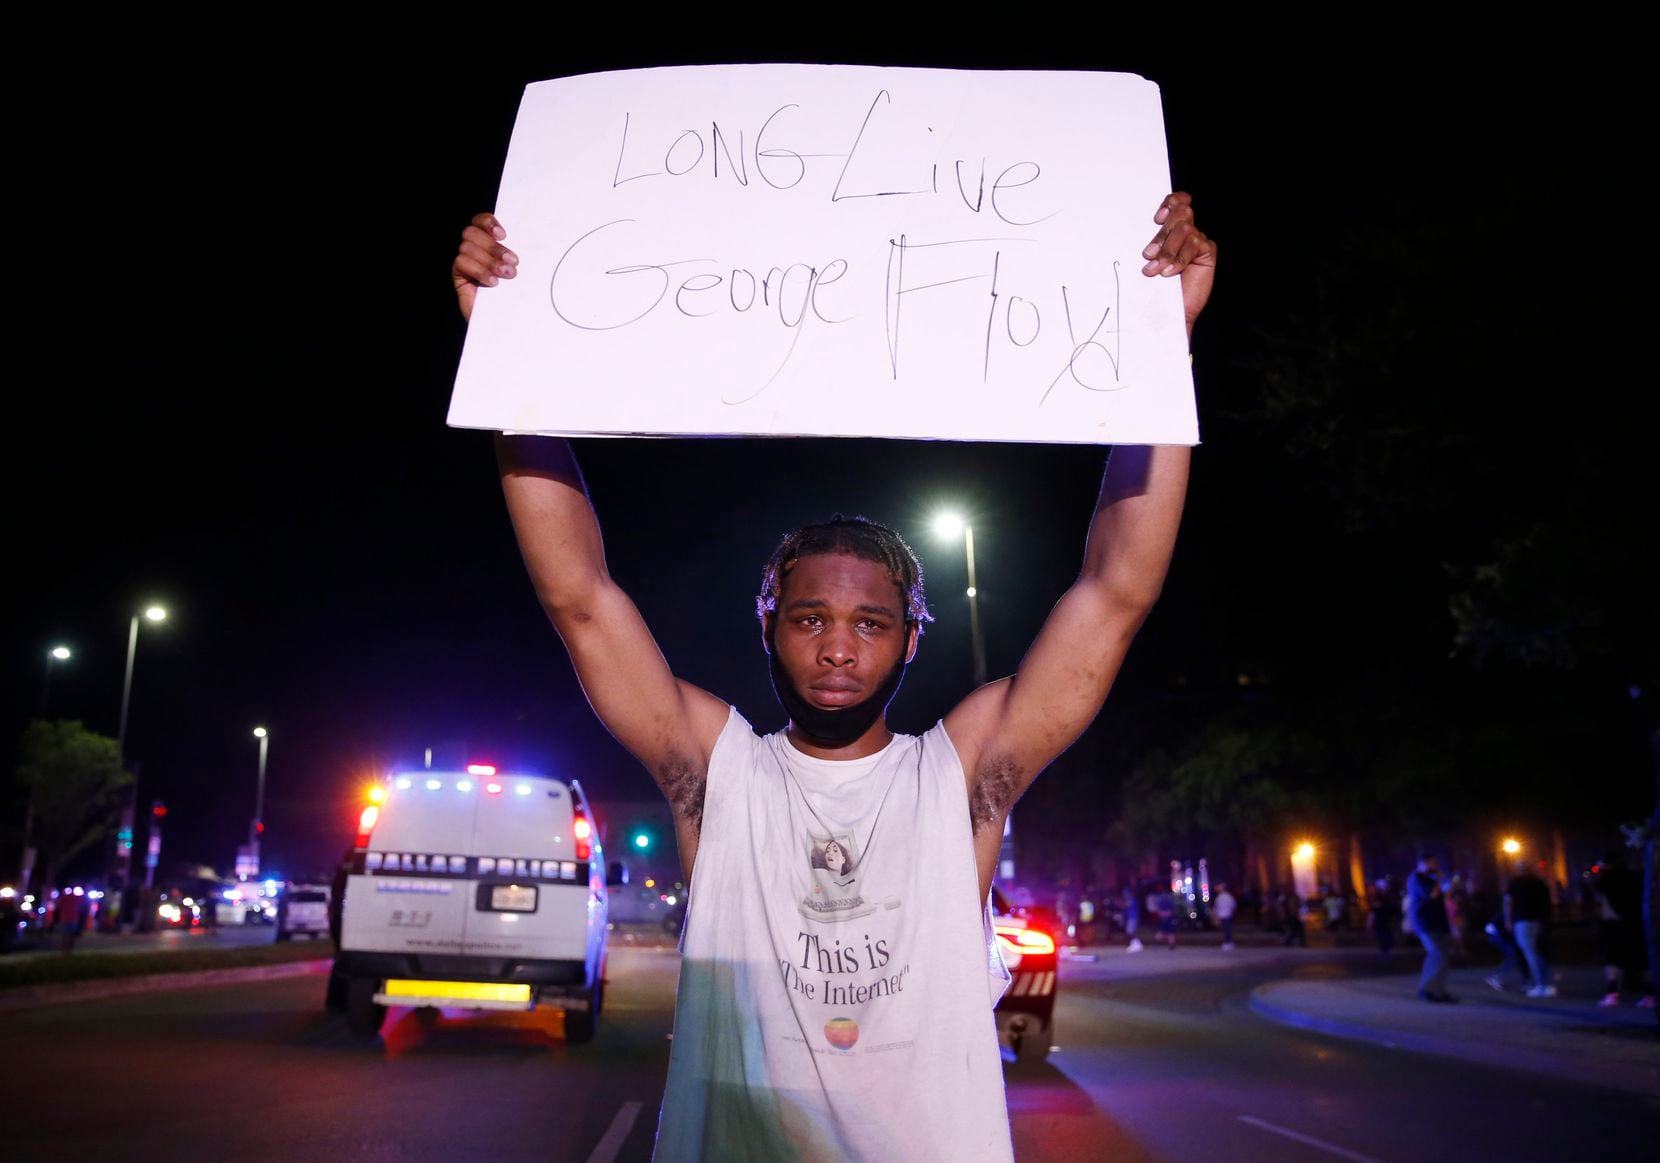 Jordan Spotser of Dallas holds up a sign in front of Dallas police during a demonstration...